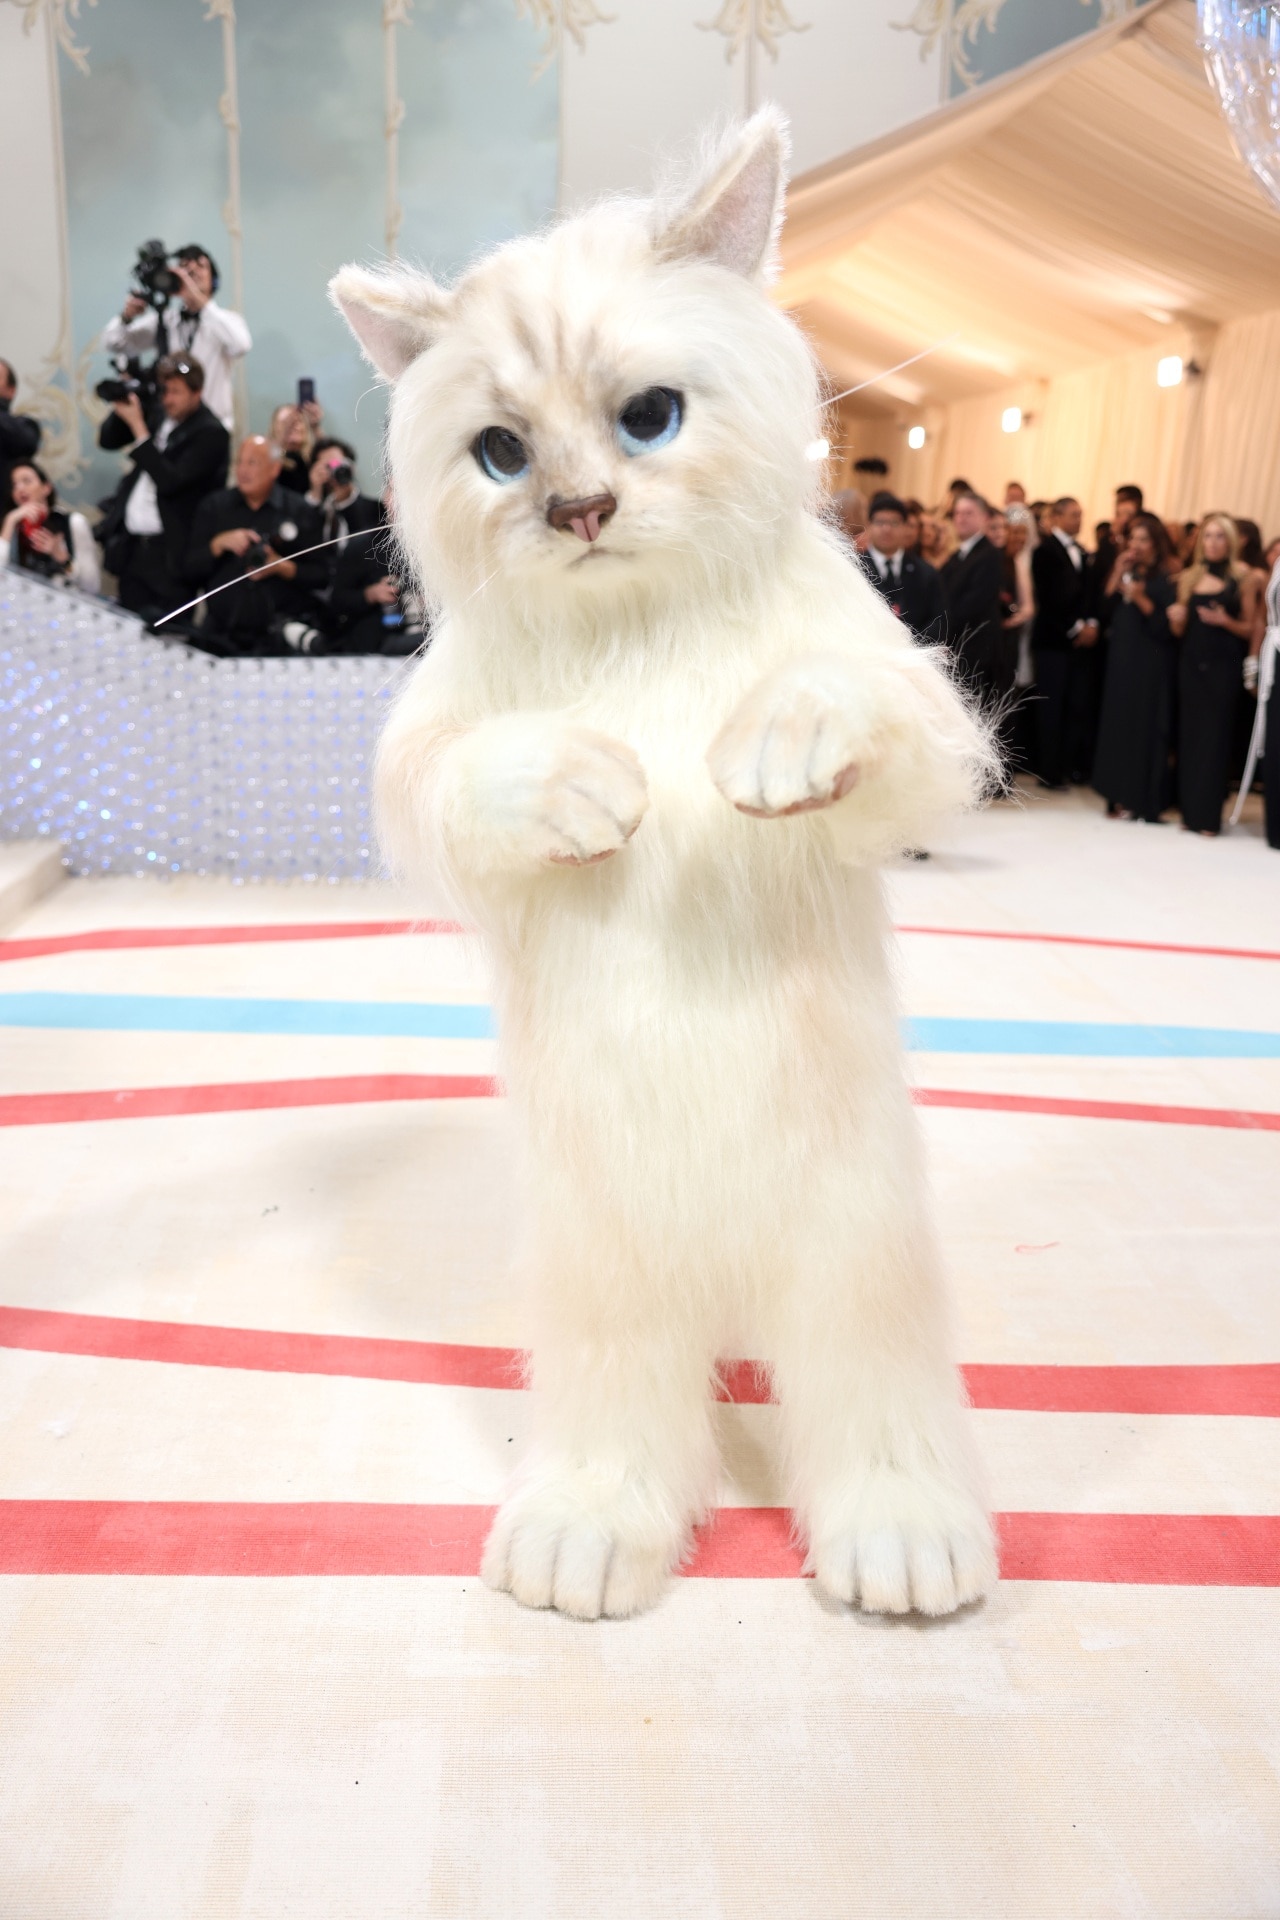 Everything to Know About Karl Lagerfeld's Chic Cat, Choupette